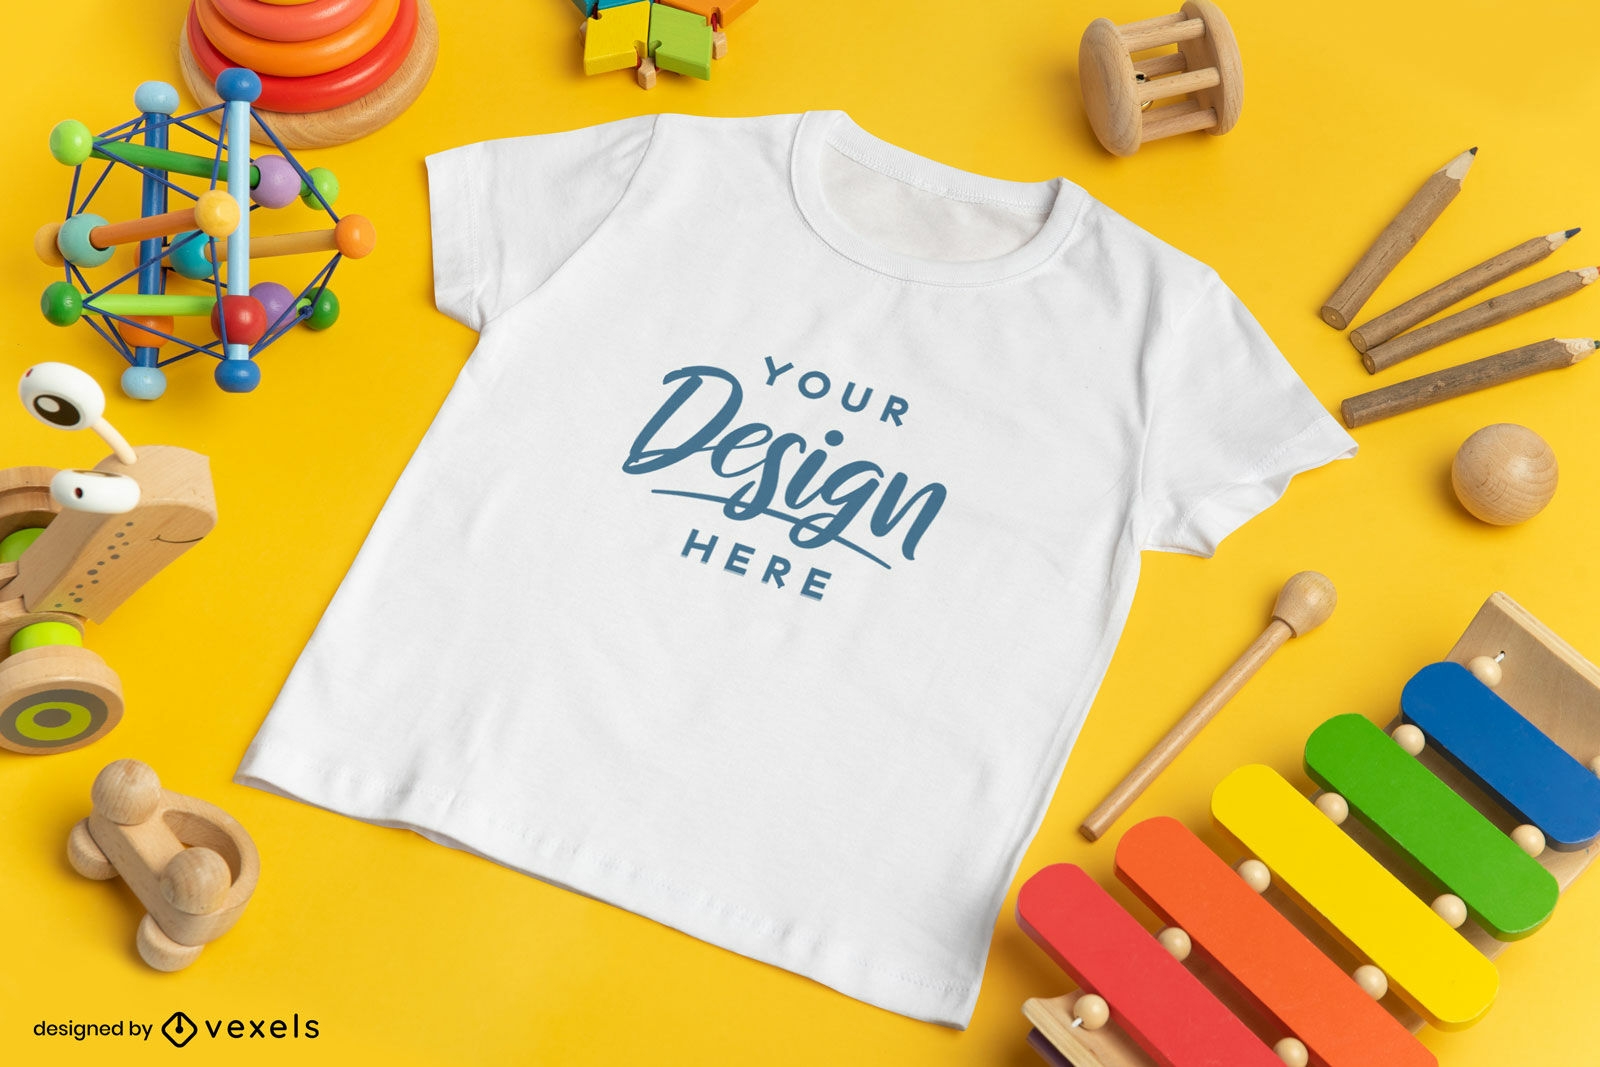 Toys and t-shirt mockup design